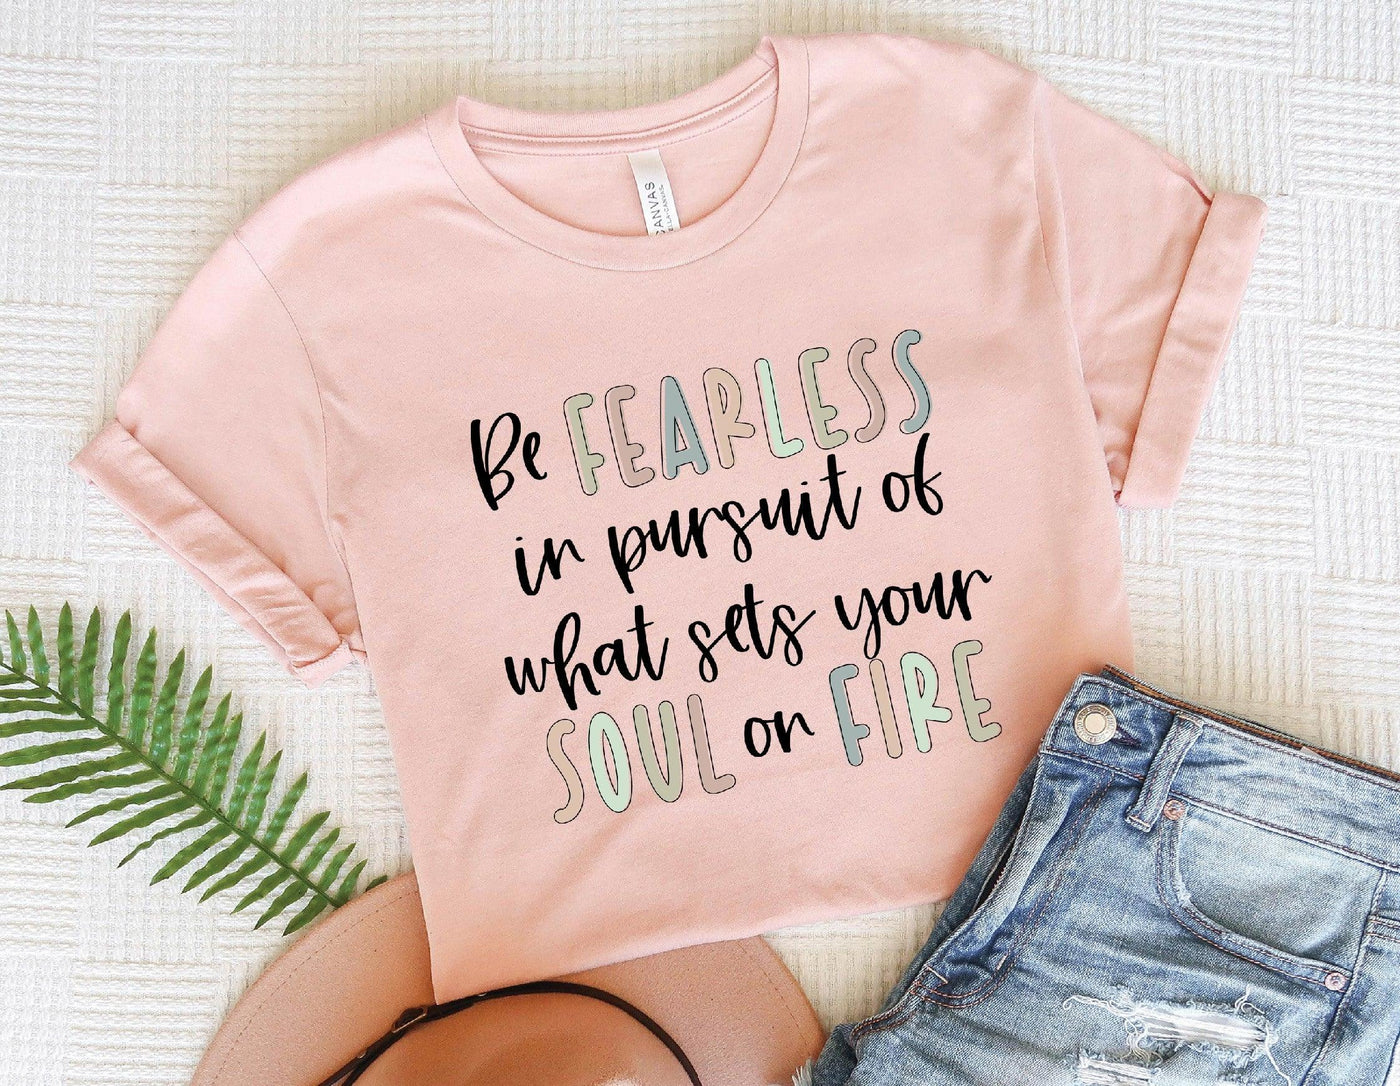 Be fearless if pursuit of what sets your soul on fire - Grace & Co. Designs 